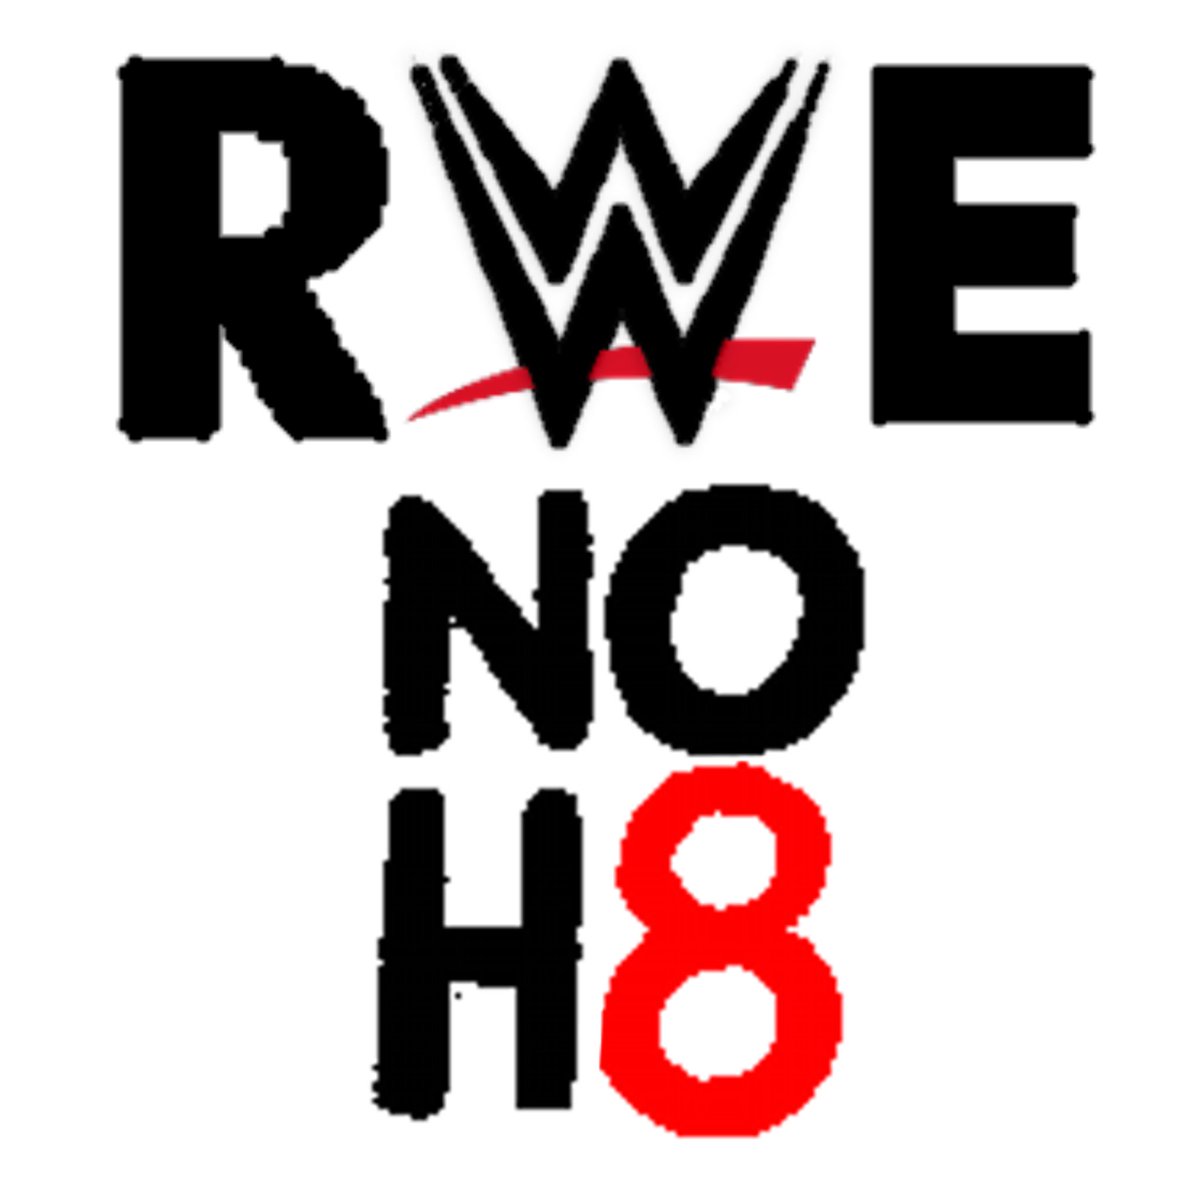 For the first time [RWE] partners with the NOH8 Campaign to support their anti bullying campaign! Say NO to all types of bullying whether it’s in person or online. Show your support by joining the campaign using the hashtag #RWENOH8 to fight against bullying! NOH8!